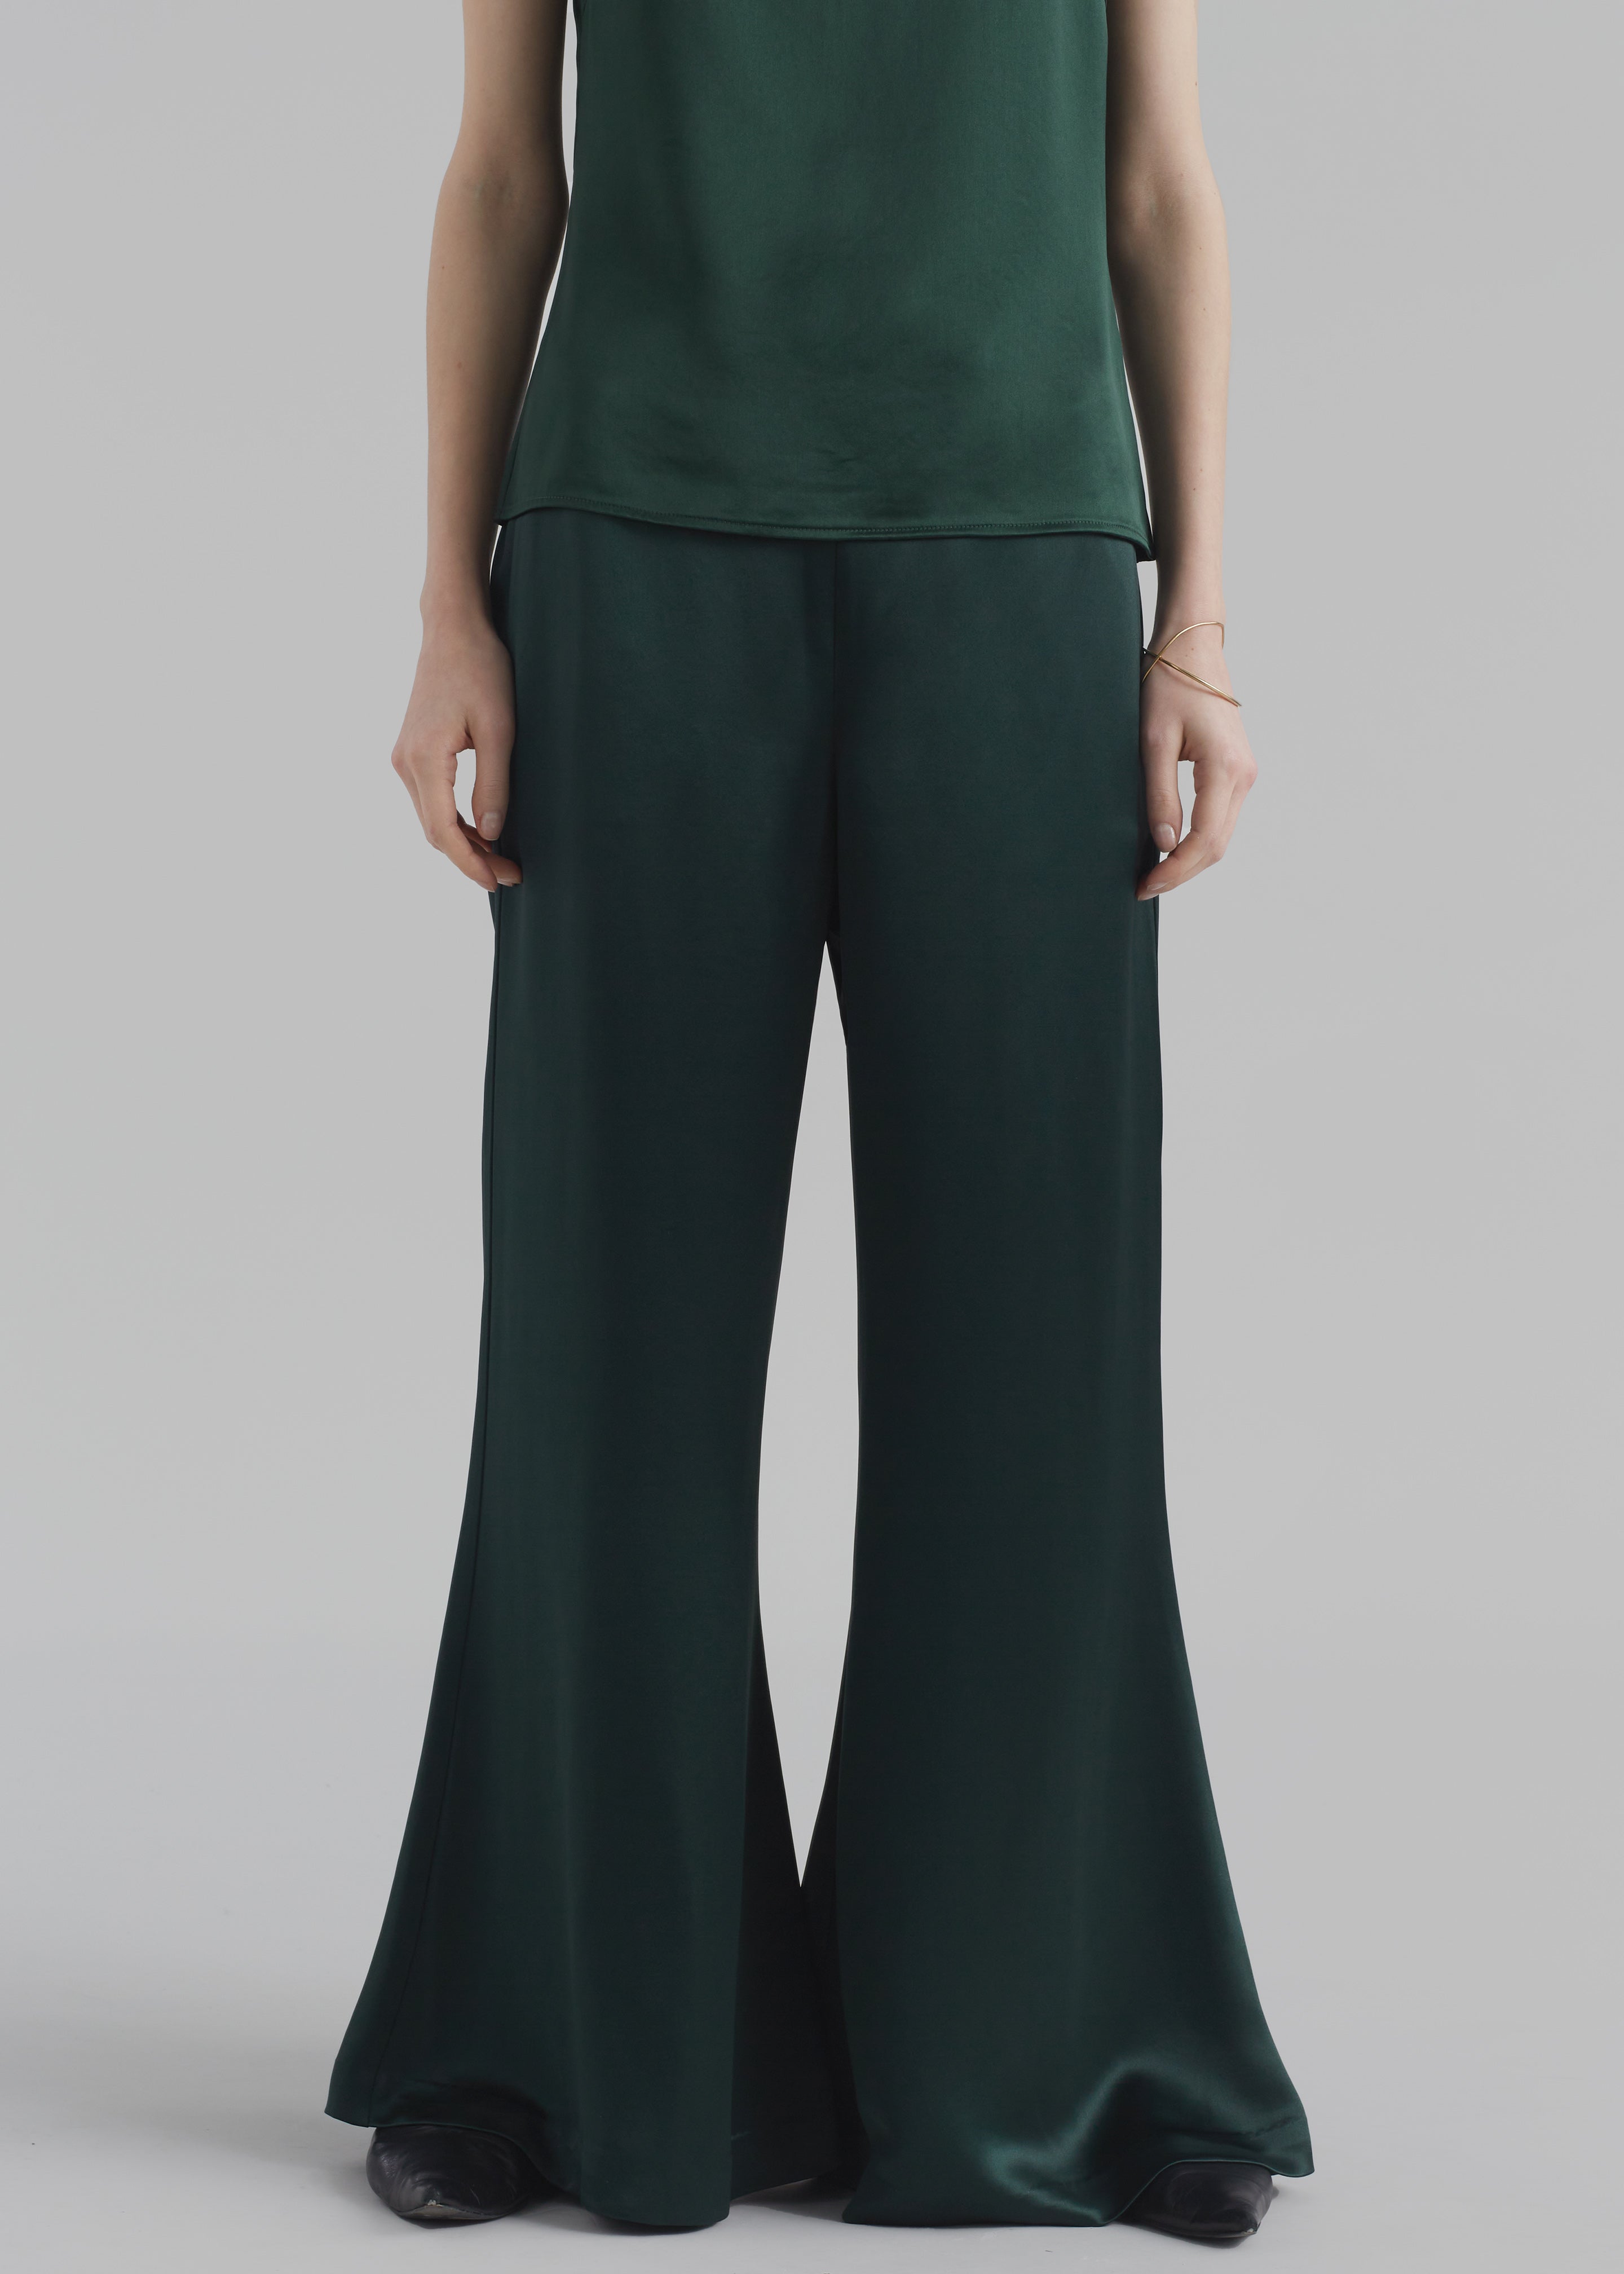 By Malene Birger Lucee Flared Trousers - Sycamore - 4